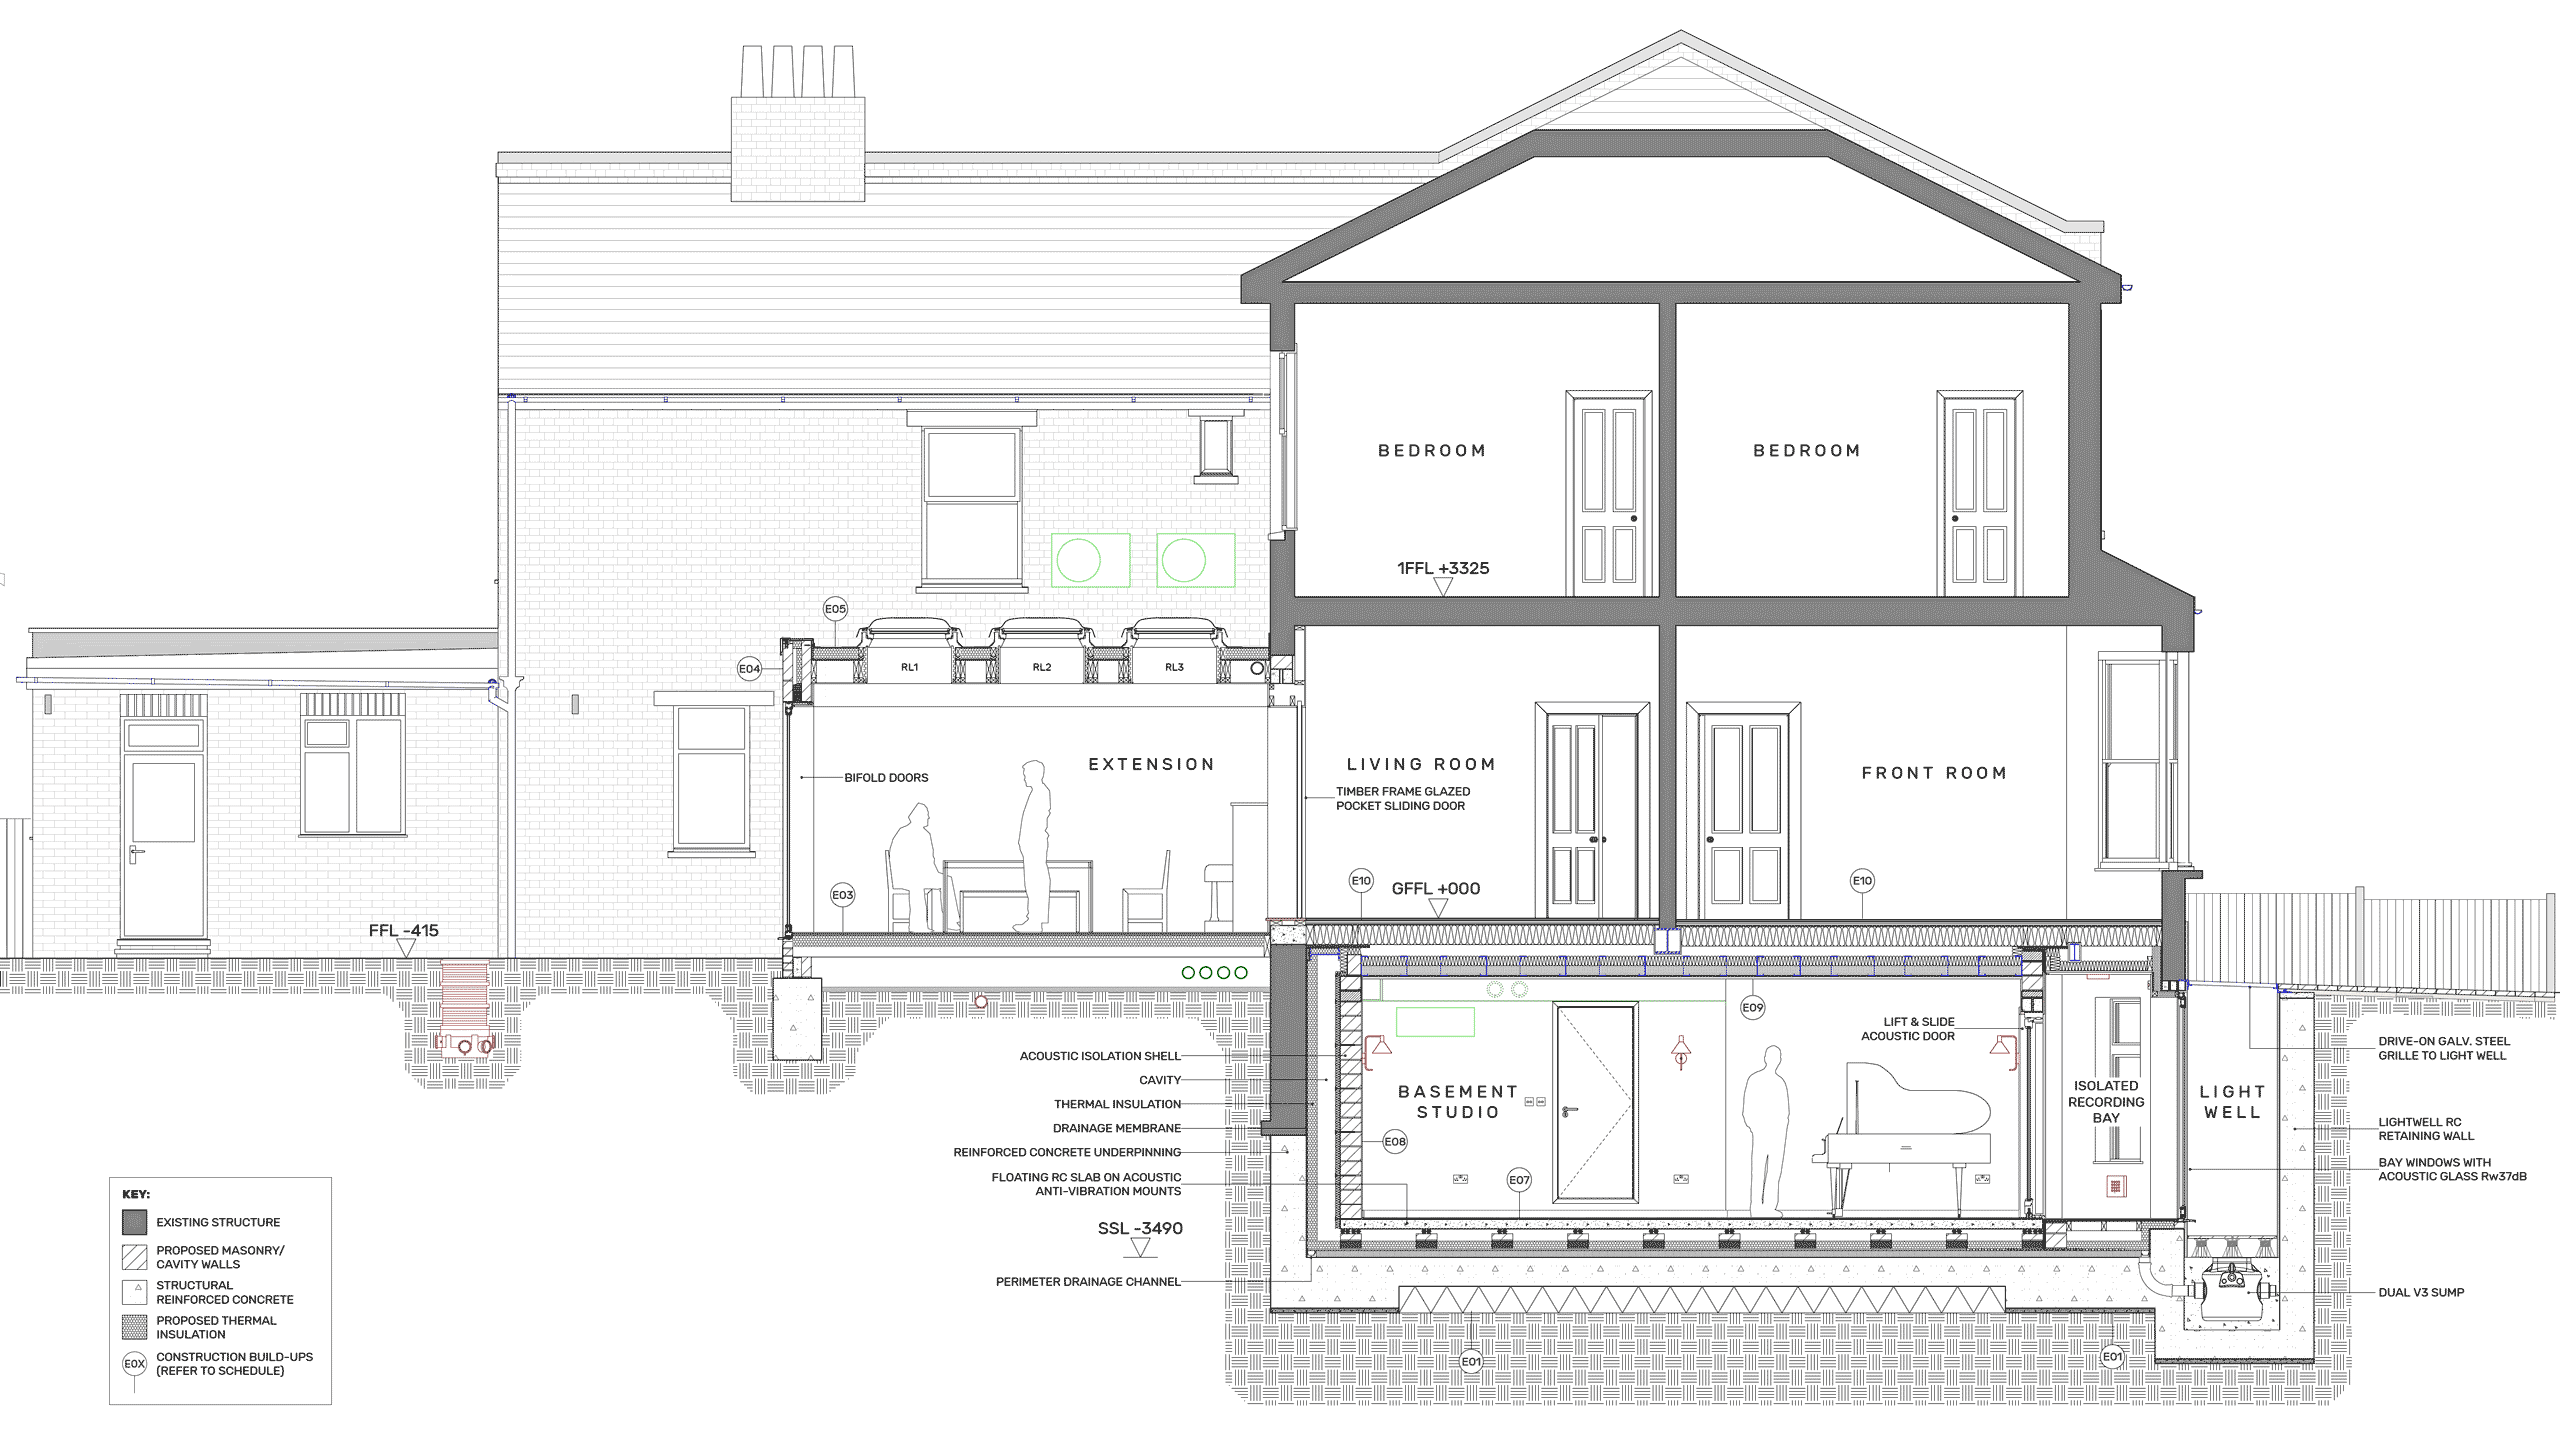 1 to 50 scale section drawing of basement studio and extension to a Victorian house